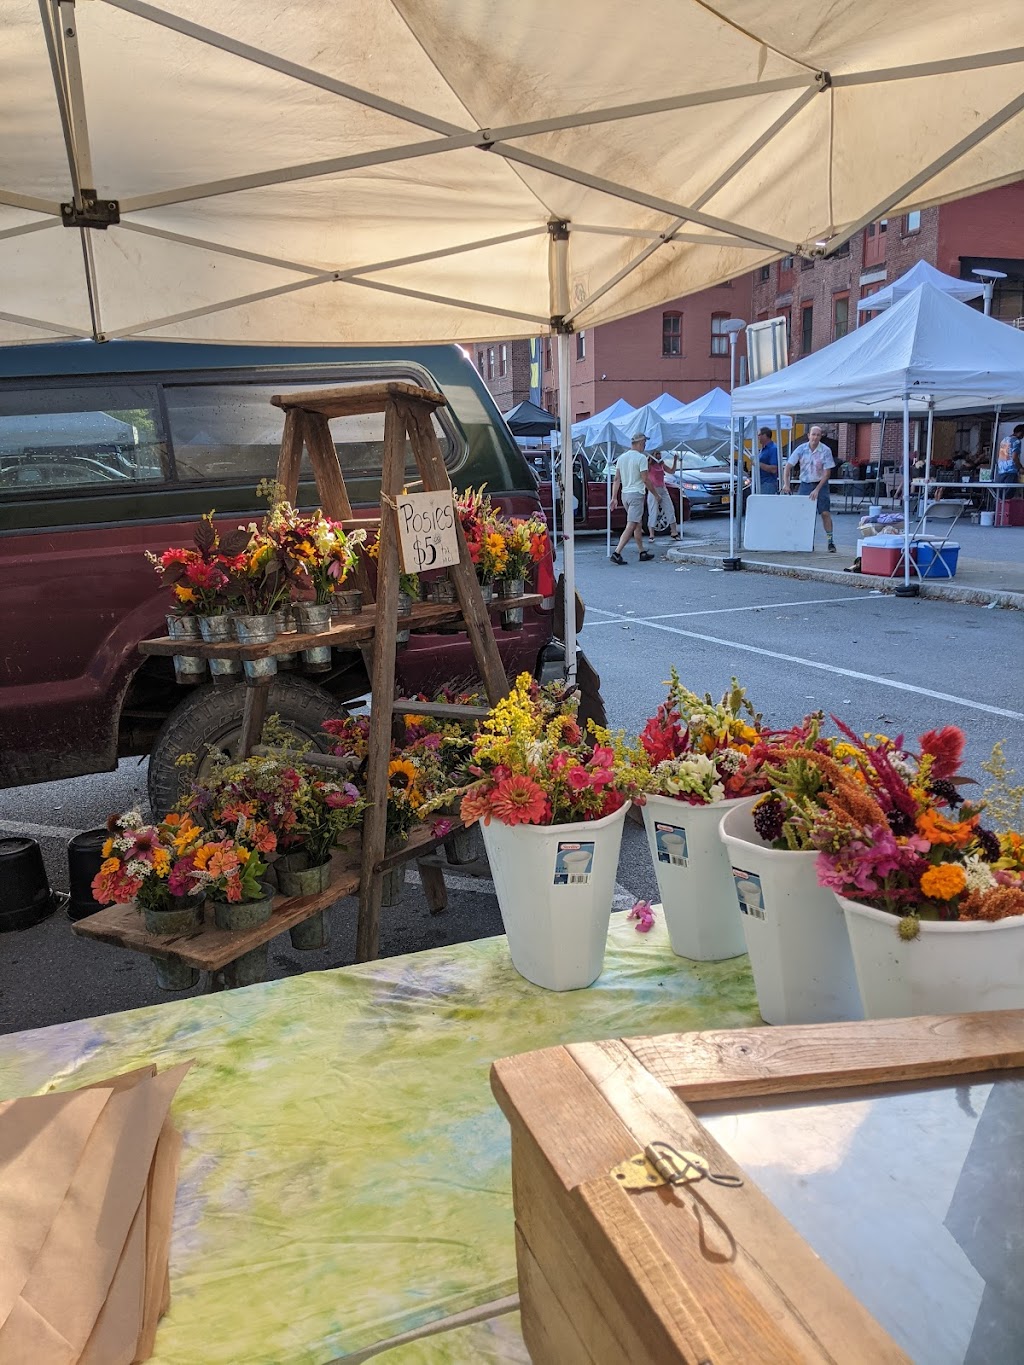 Troy Waterfront Farmers Market (Summer) | 4 3rd St, Troy, NY 12180 | Phone: (518) 708-4216